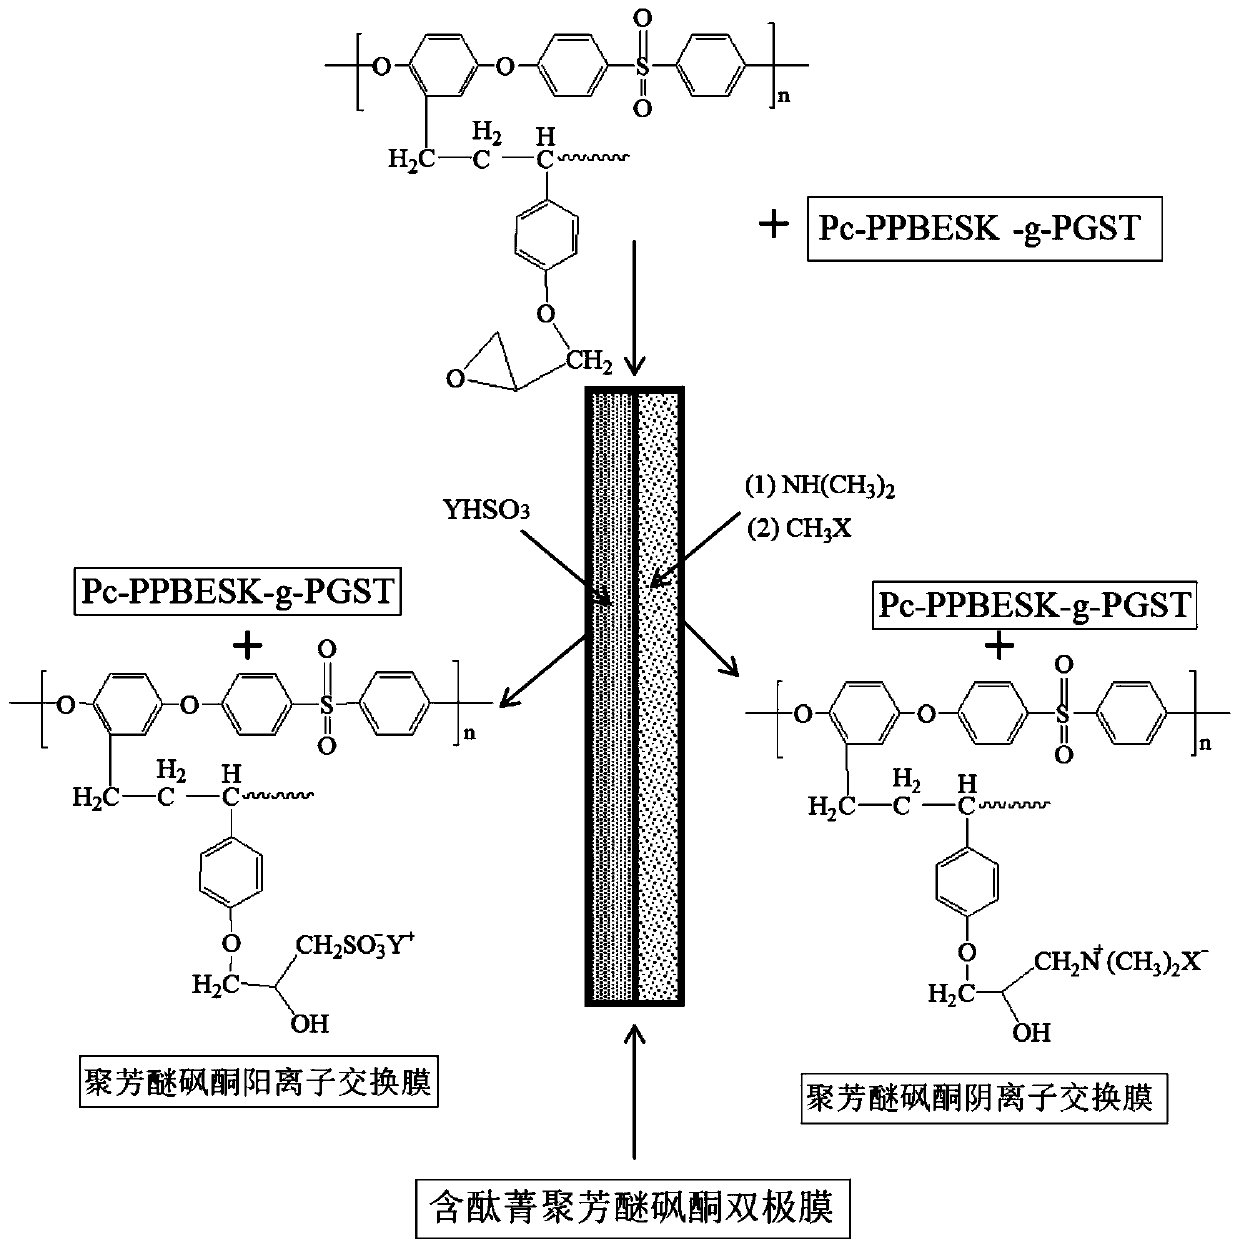 Preparation method of monolithic poly(aryl ether sulfone ketone) bipolar membrane with side chain containing phthalocyanine water dissociation catalytic group